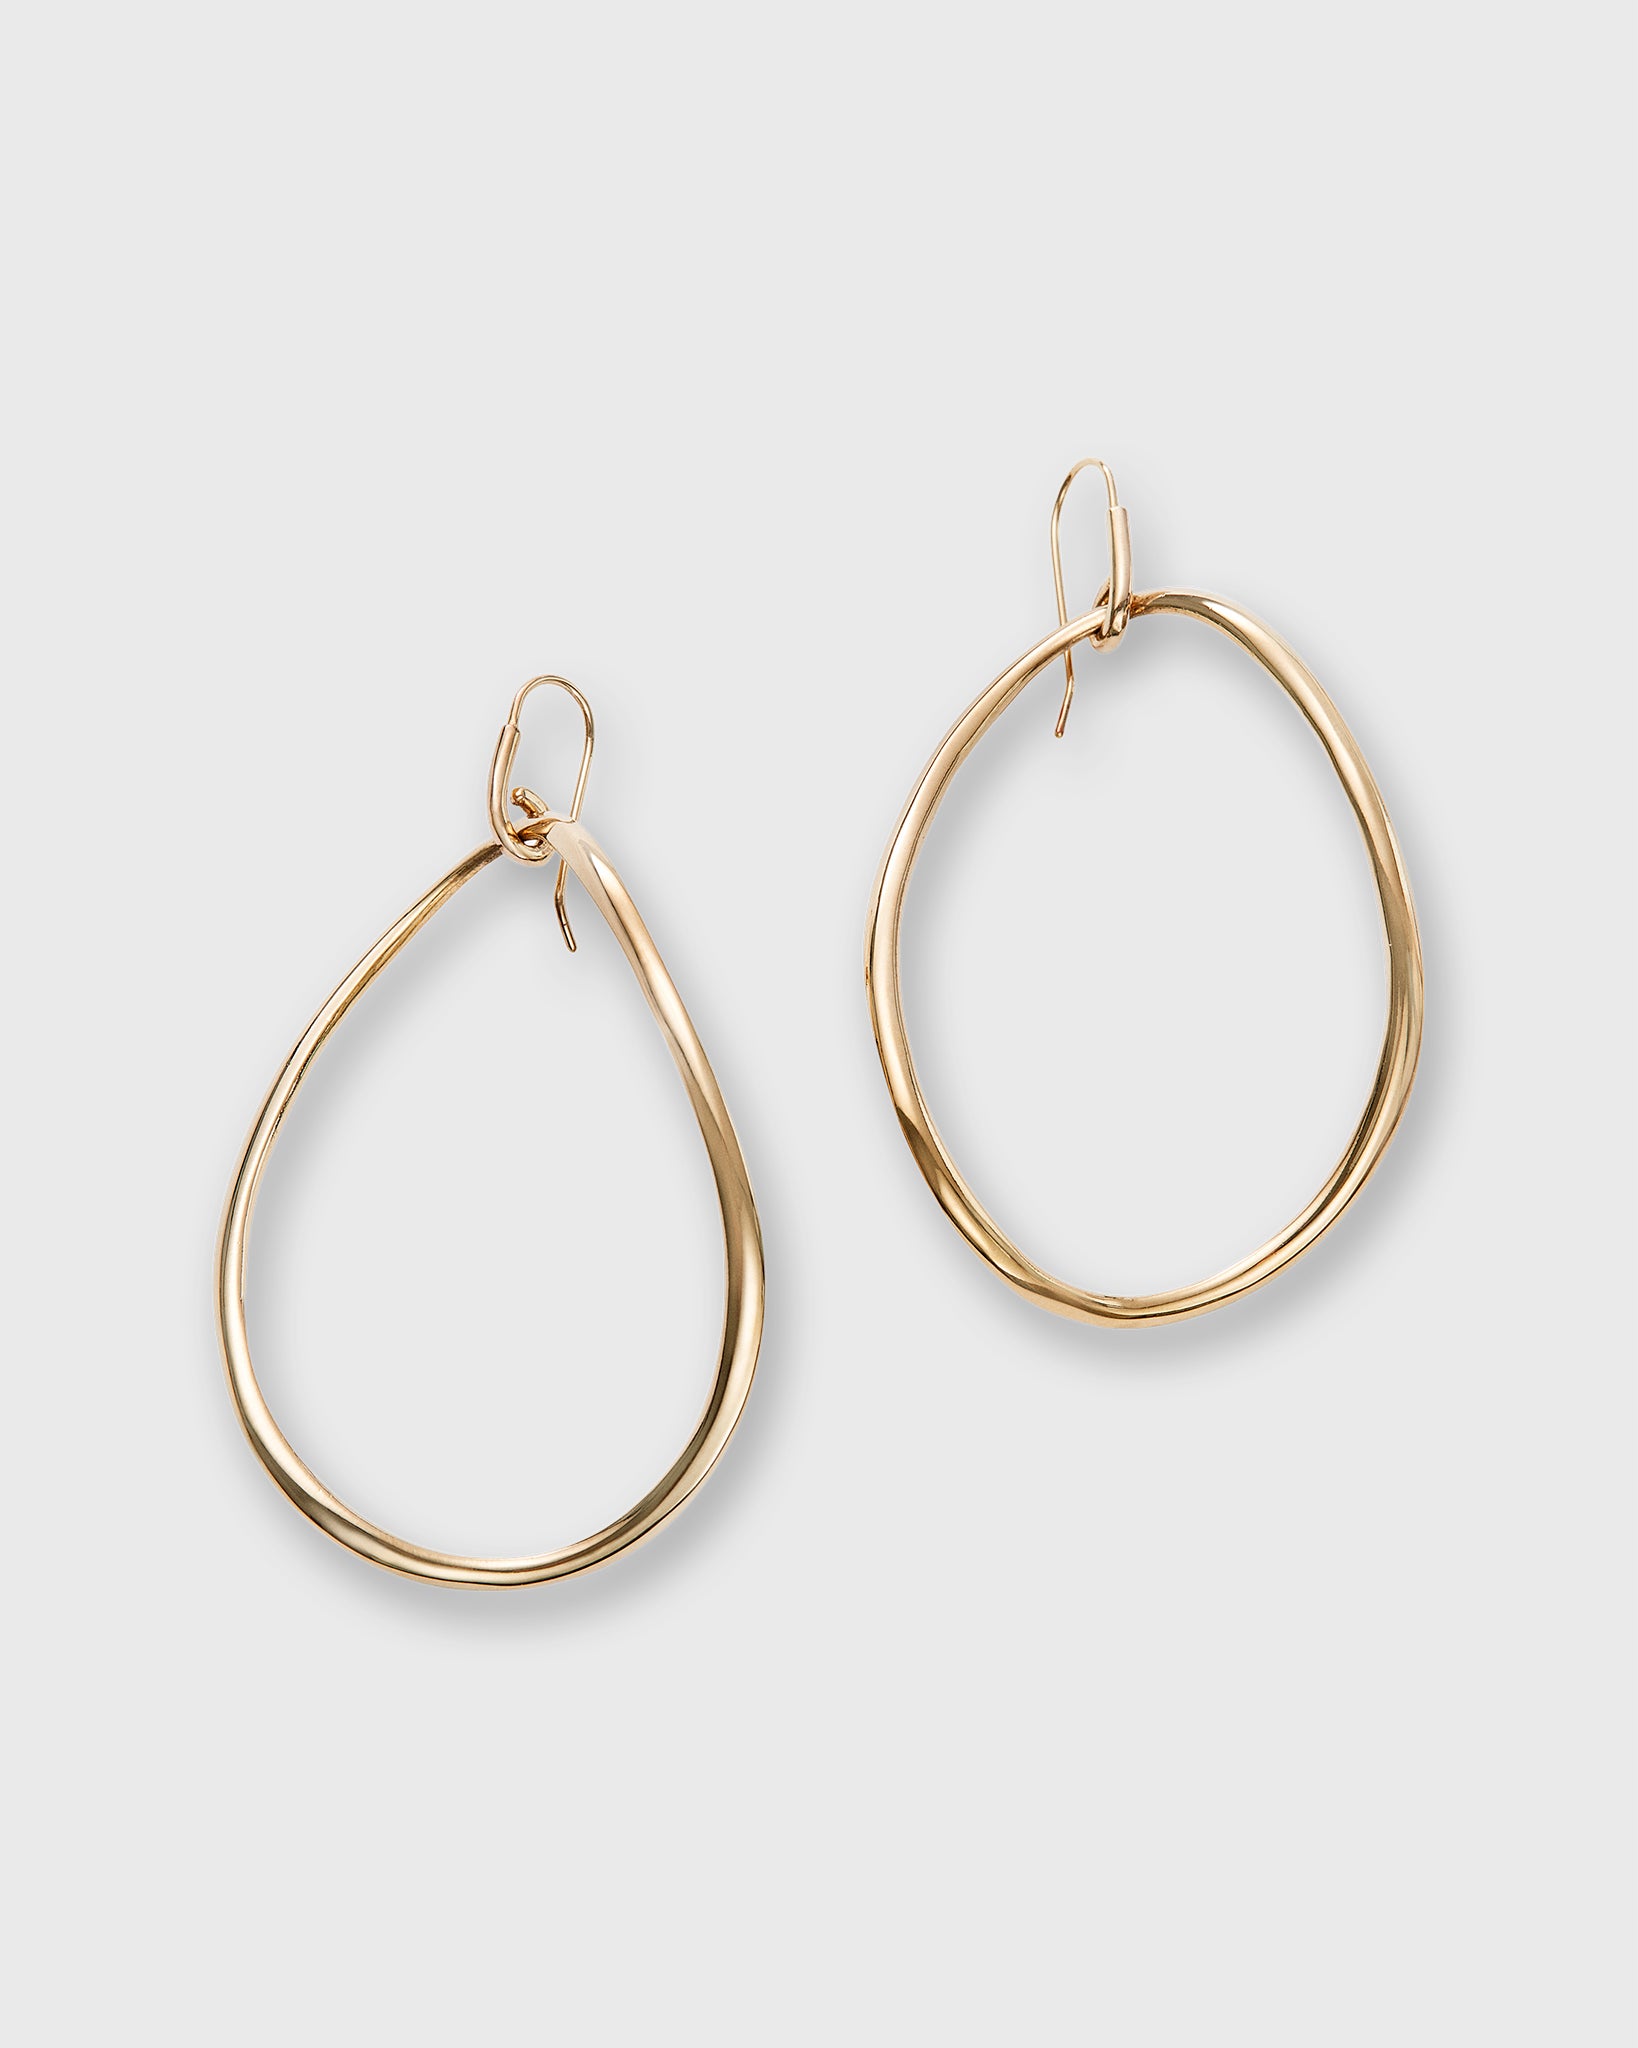 Extra Large Organic Hoop Earrings in Gold-Plated Brass